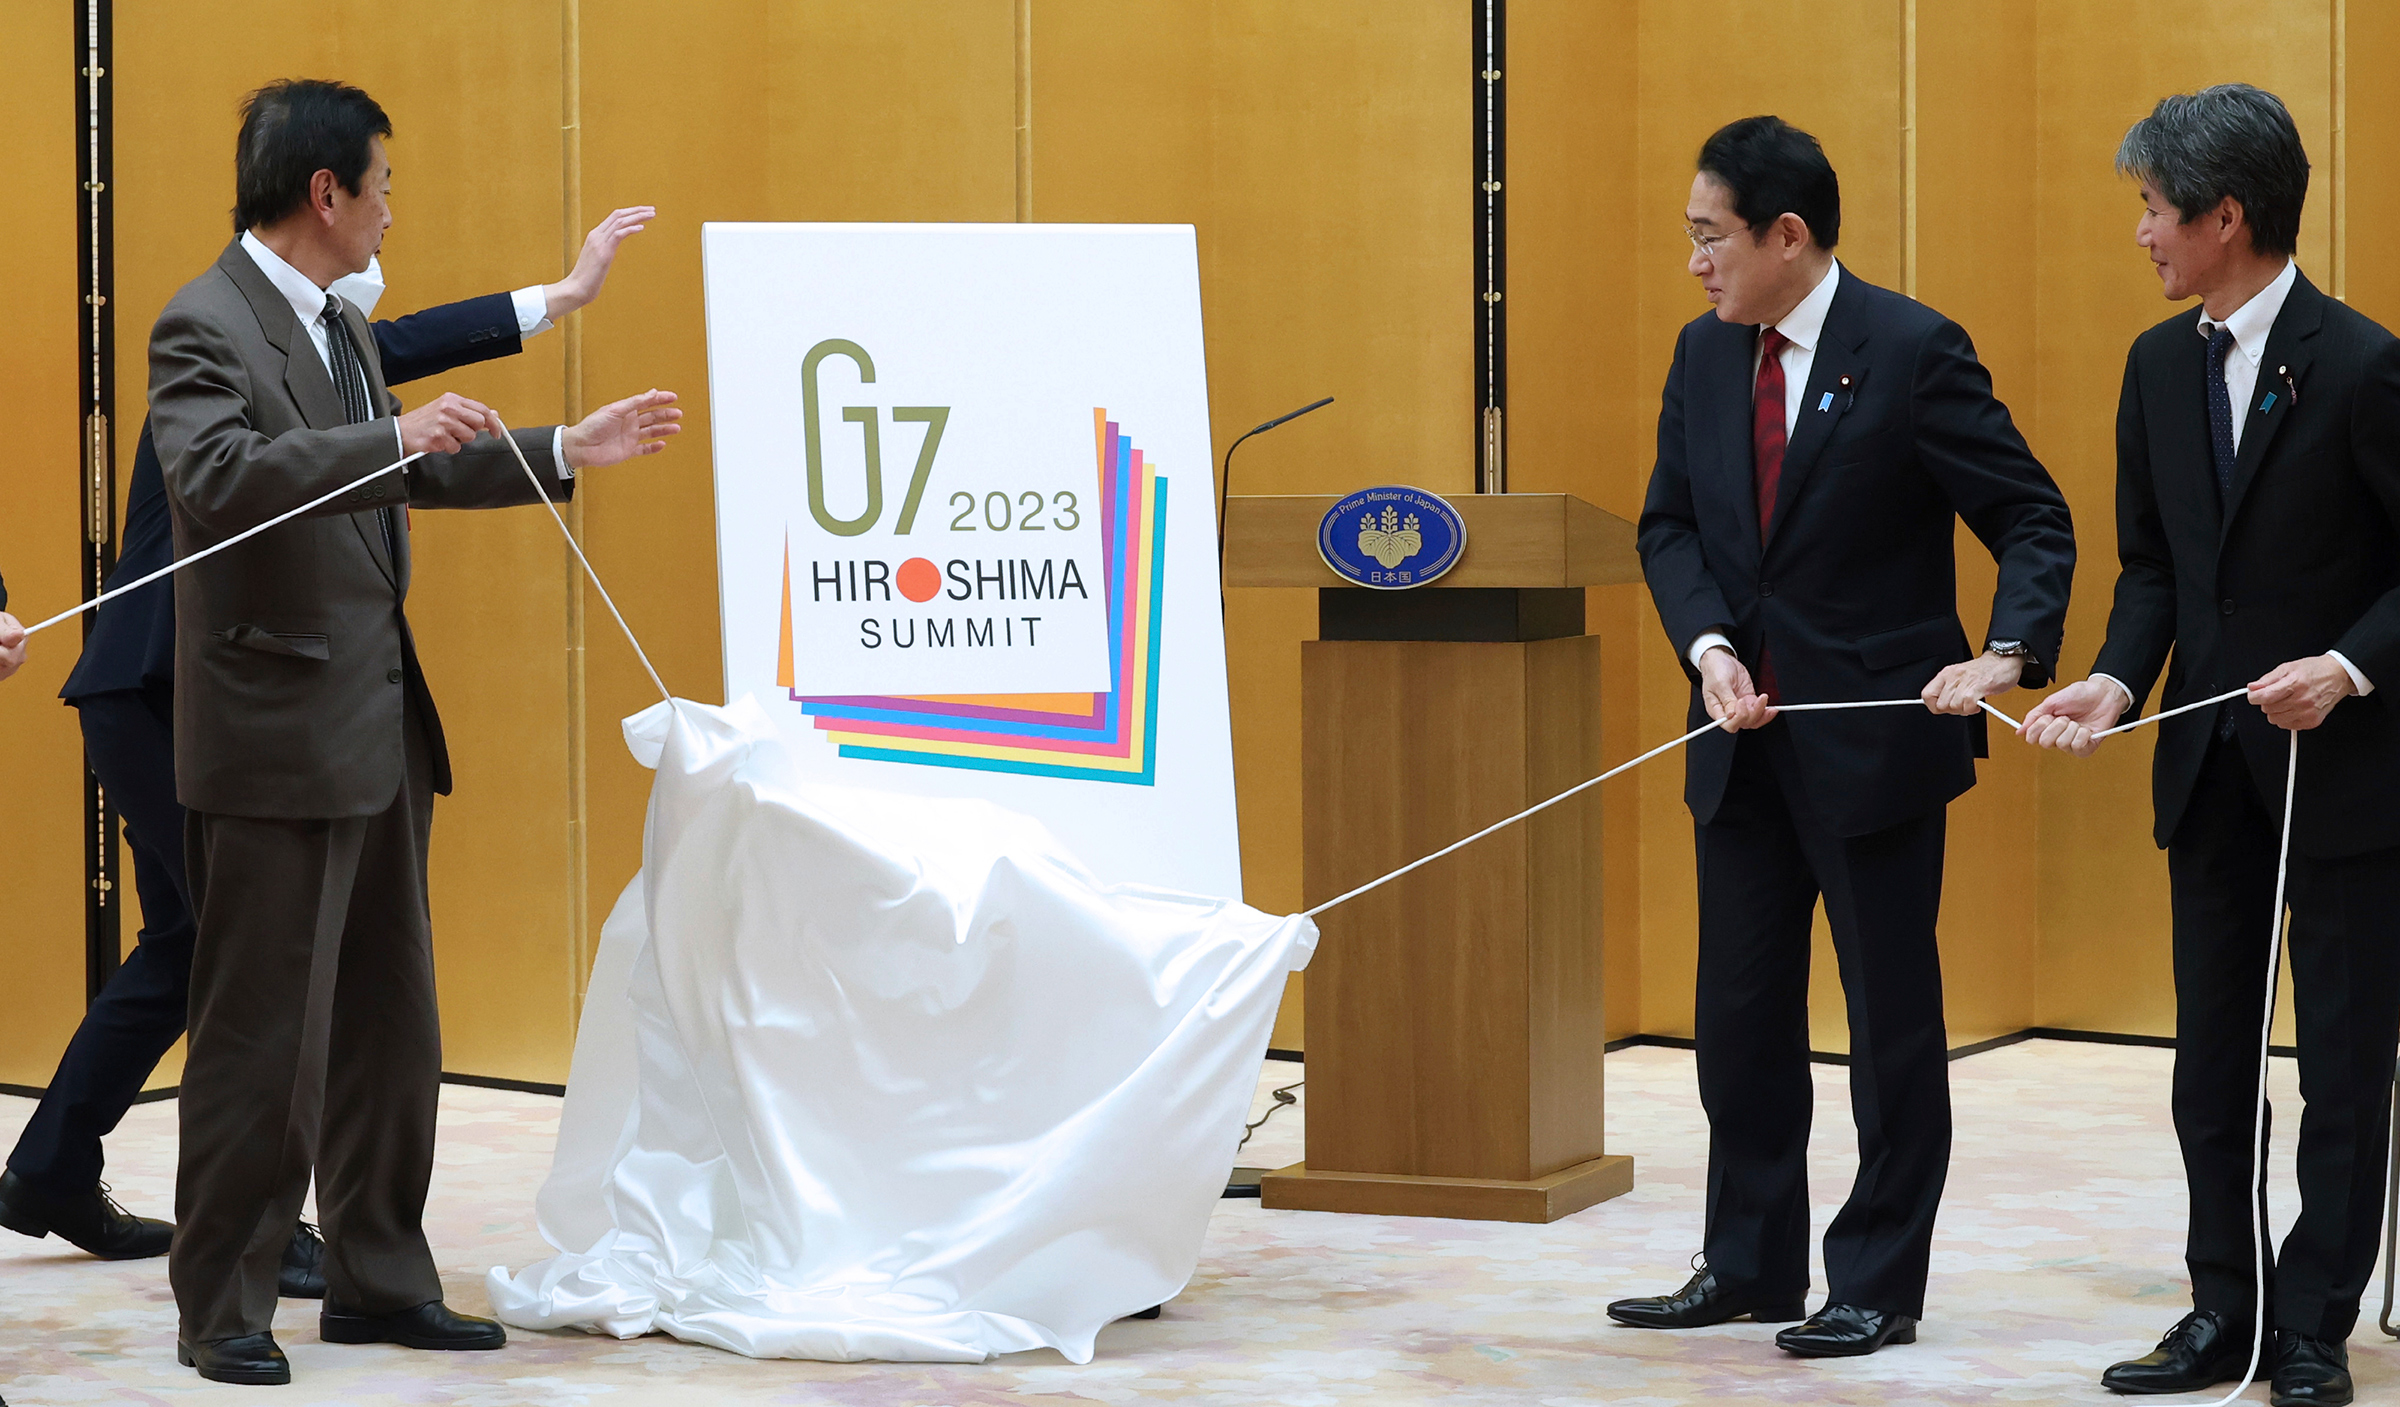 Japan Prime Minister Fumio Kishida (second from right) unveils the G7 summit logo at his Tokyo office in December. (The Yomiuri Shimbun/AP)